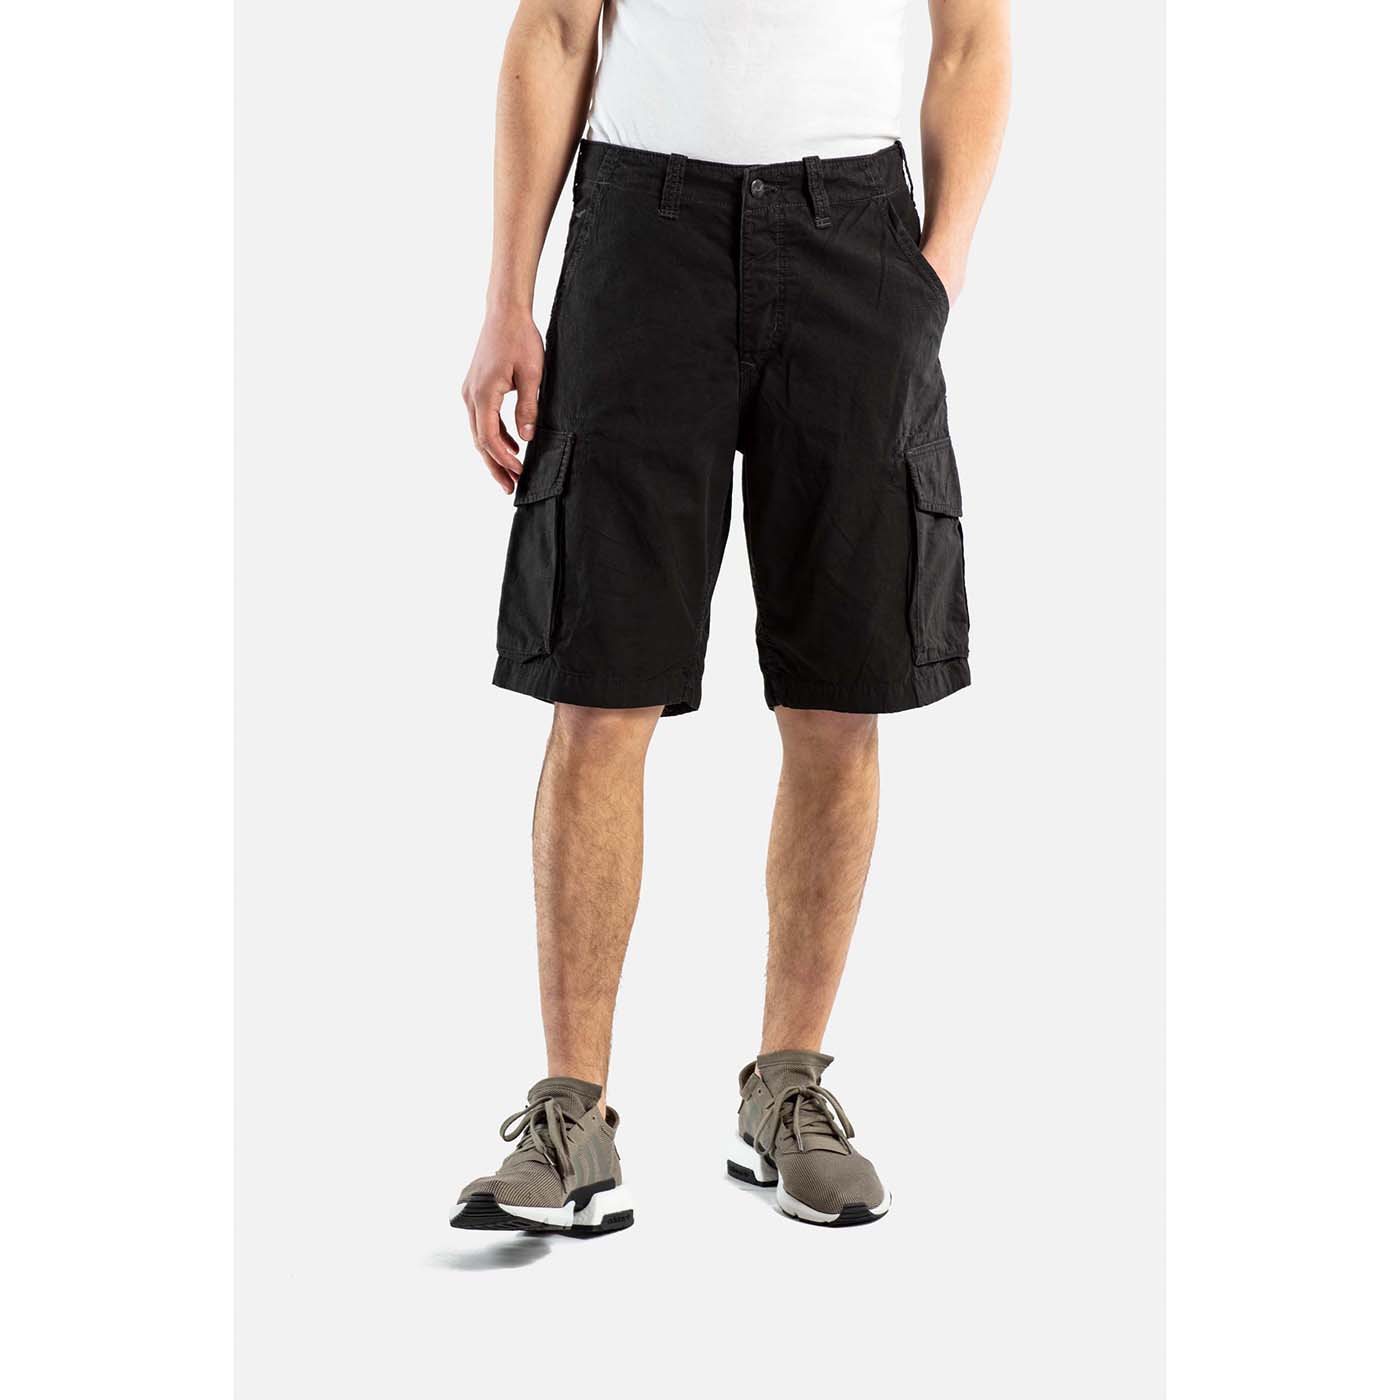 Reell Jeans New Cargo Short